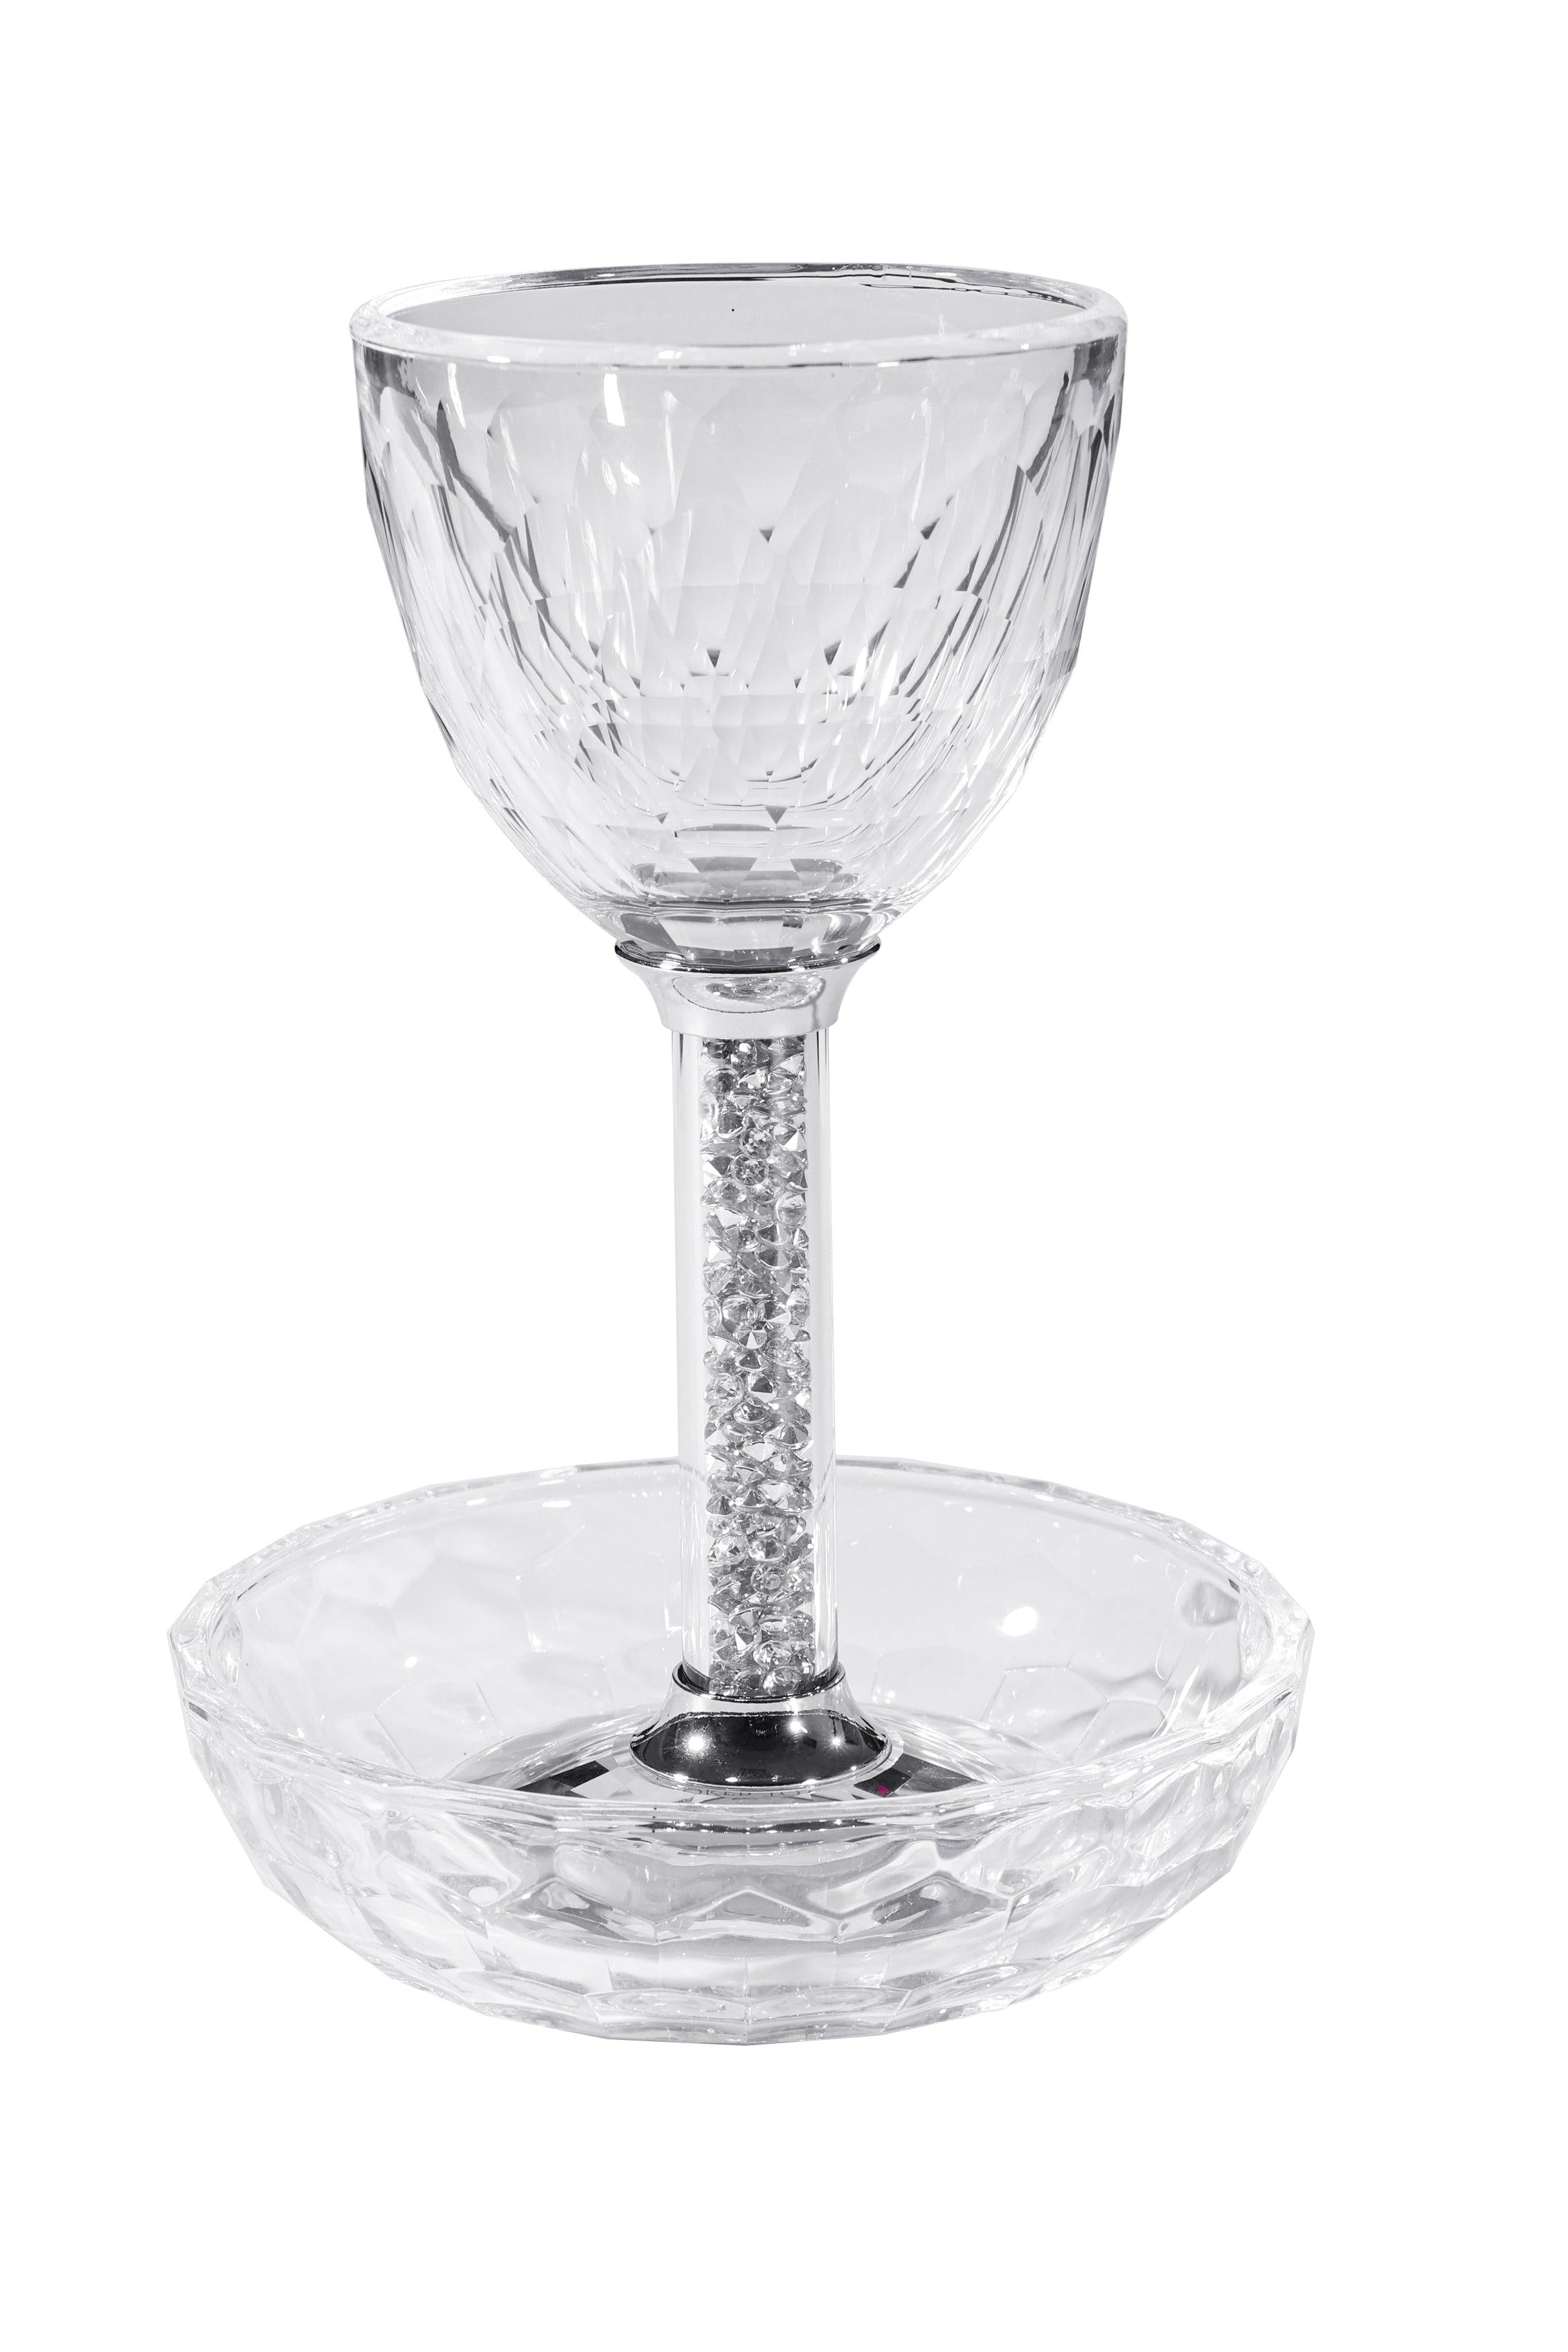 Crystal Glass with Gemstones within the Stem - Elegant Linen